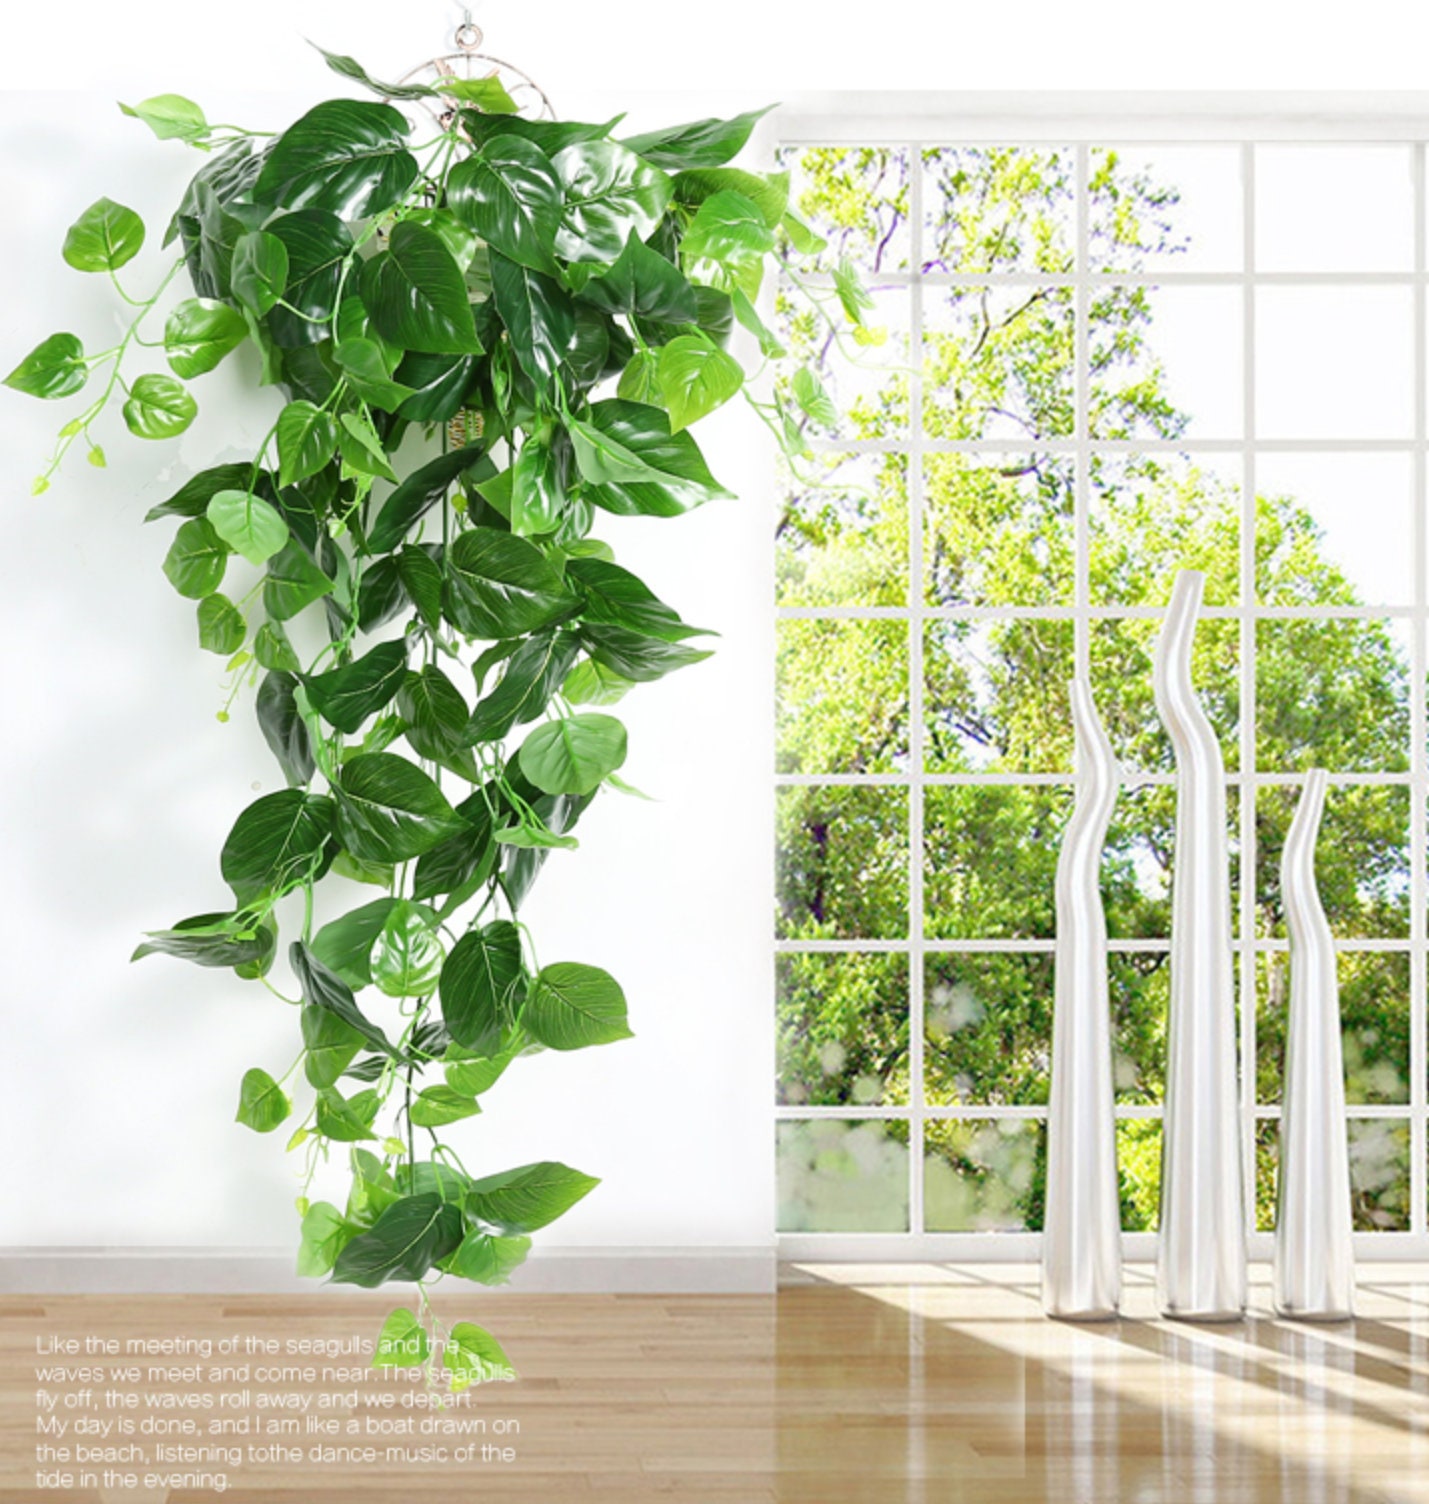 Sunjoy Tech Artificial Wall Hanging Plants, Artificial Ivy Osier Rattans  Fake Hanging Vine Plants Decor Plastic Bracketplant Greenery for Home Wall  Indoor Outdside 